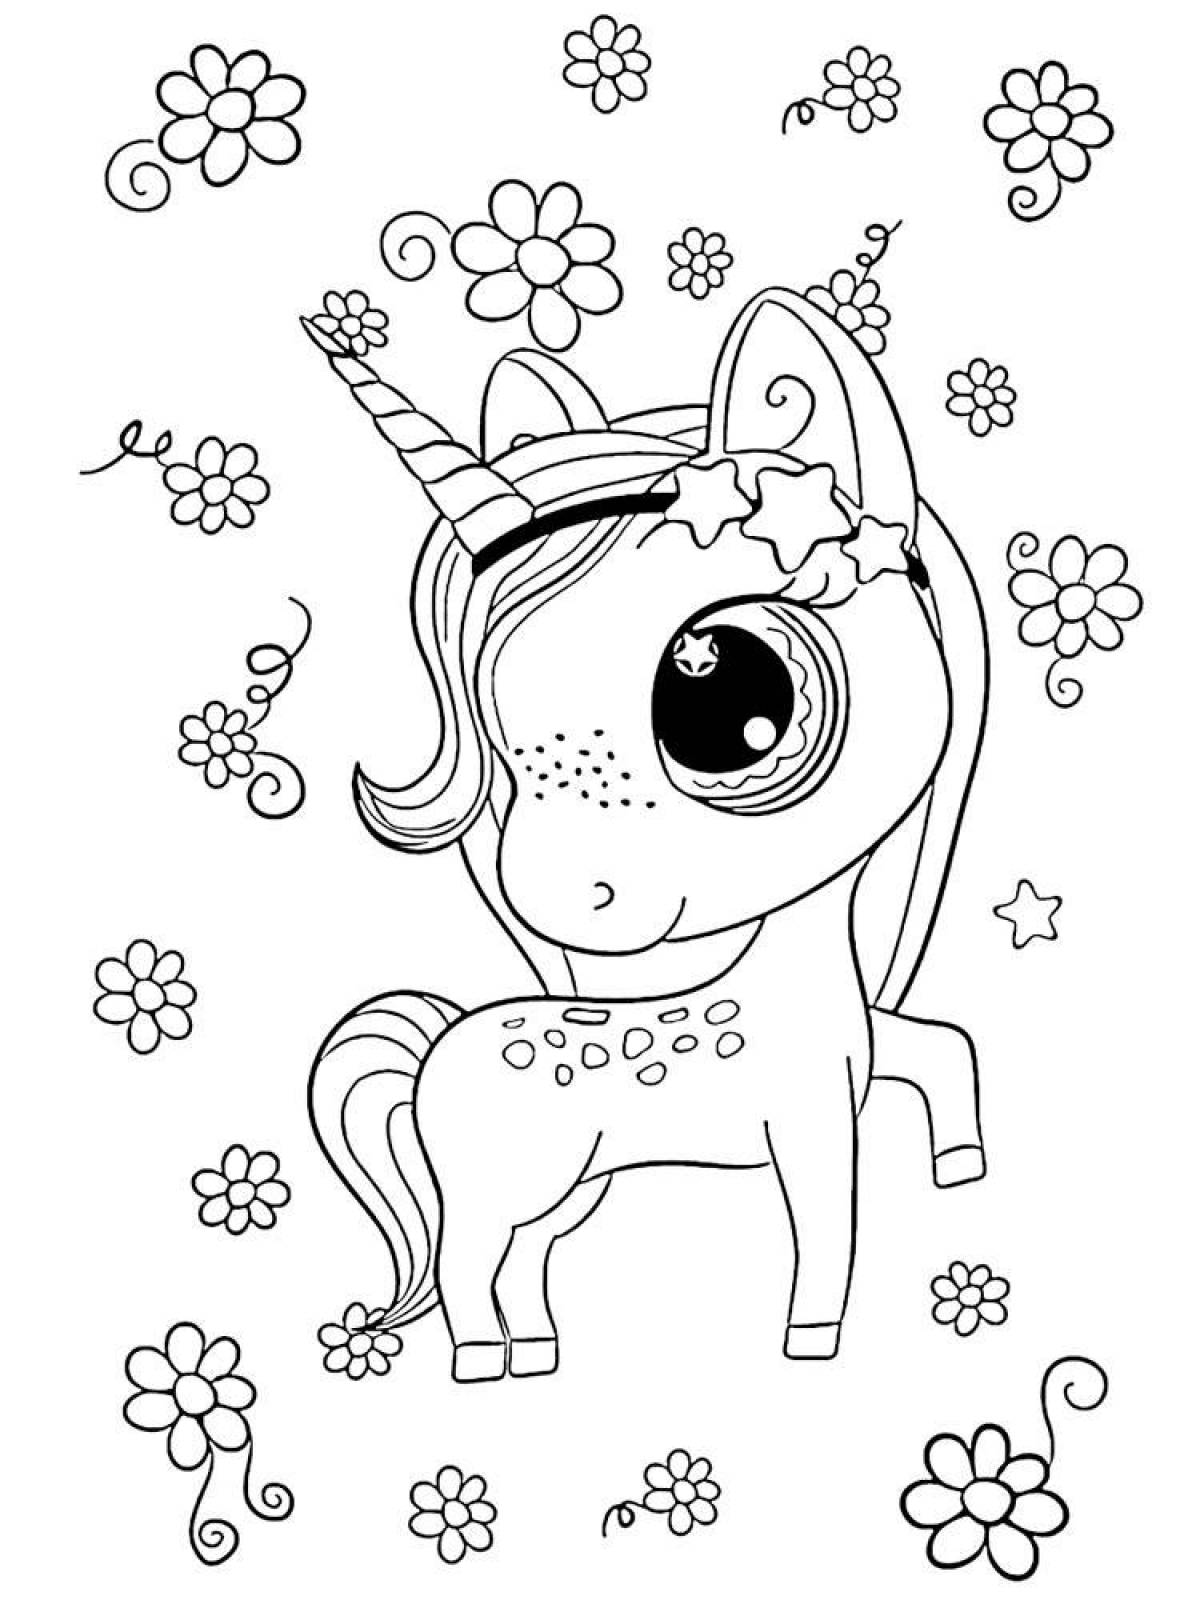 Glamorous unicorn coloring book for kids